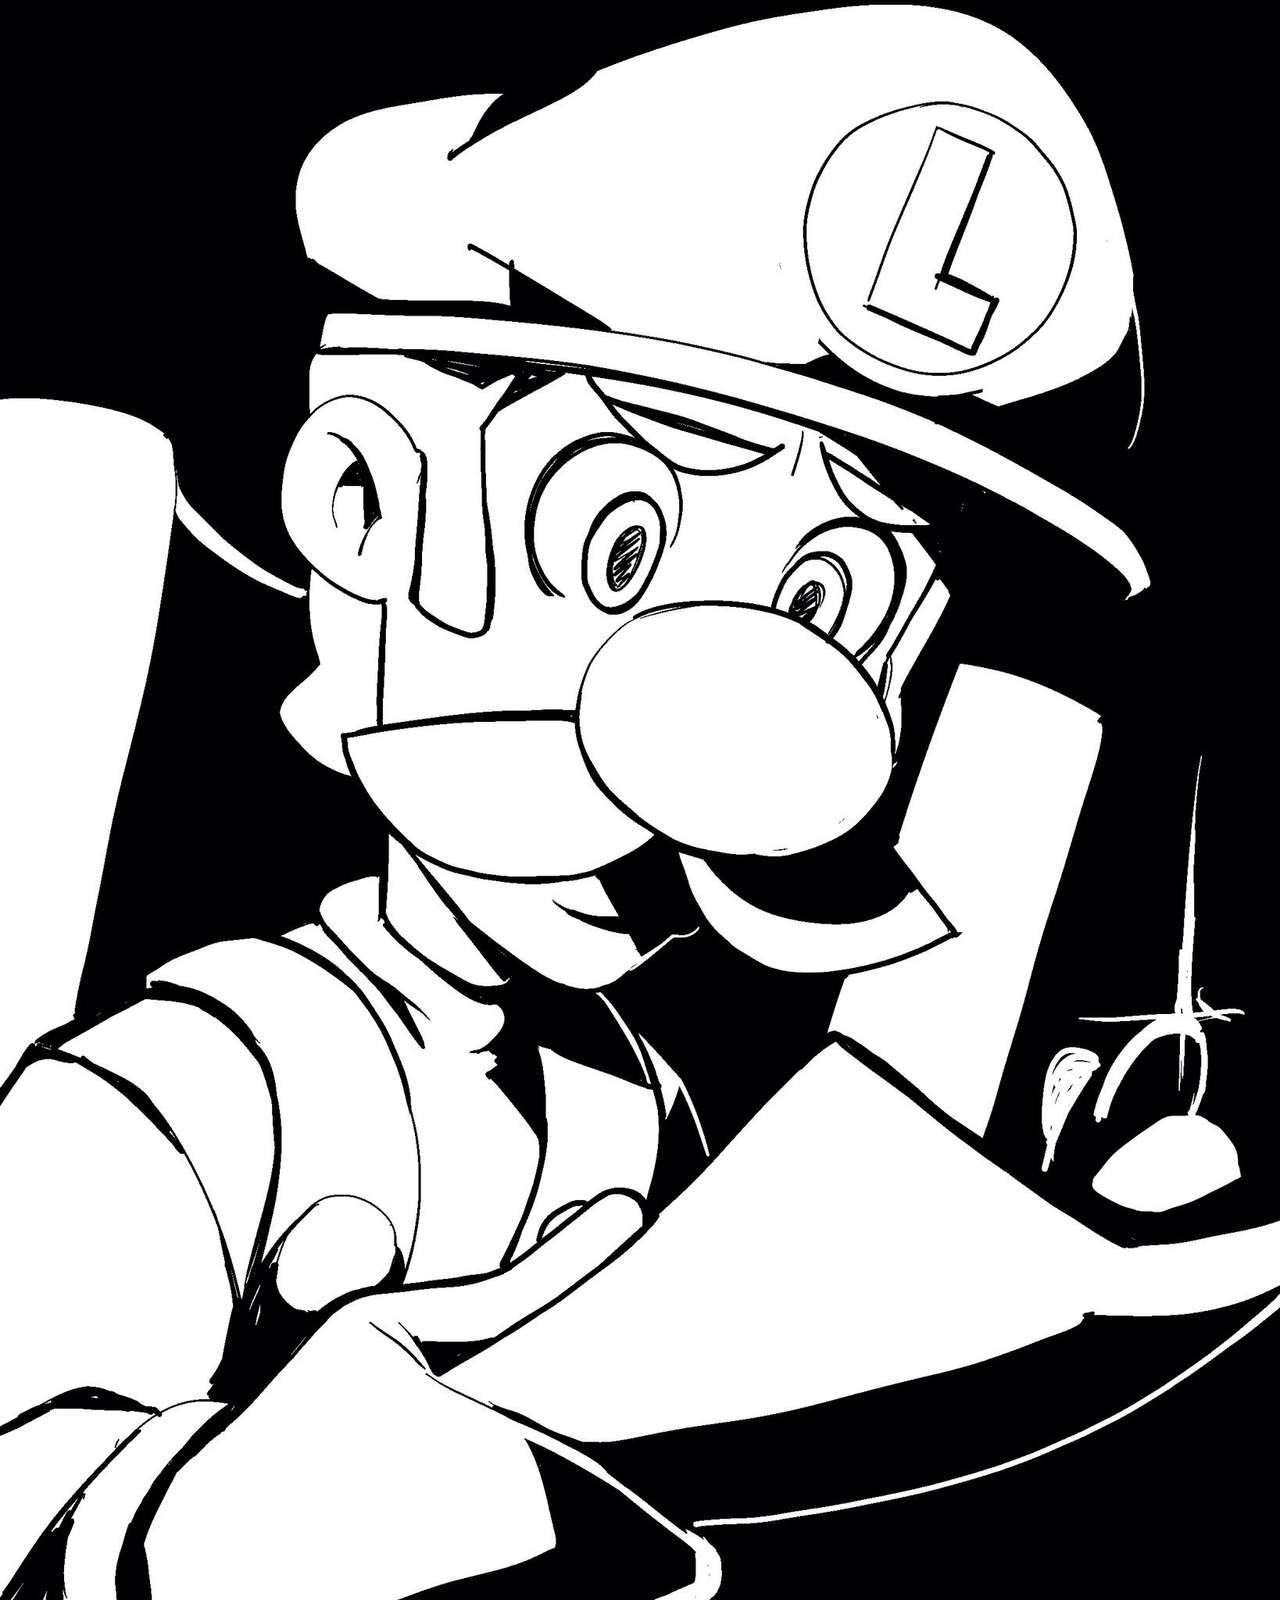 [Nisego] Inktober 2019 (Super Mario Brothers) [Ongoing] 4